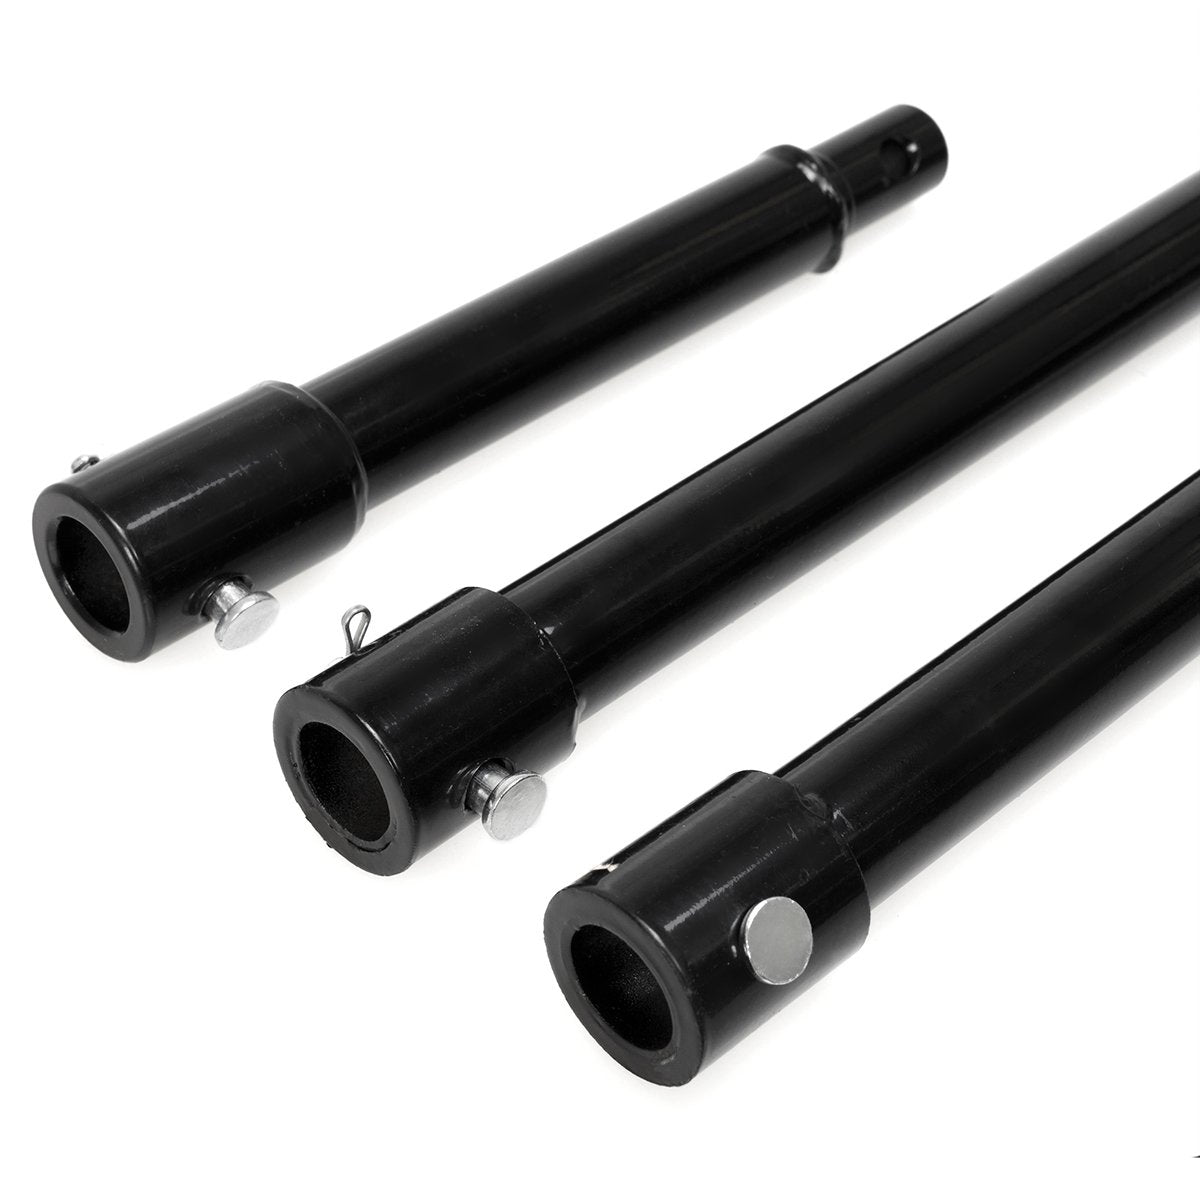 3 PC Post Hole digger Replacement Extension Auger Set 3/4" Shaft x 8",12",20" long